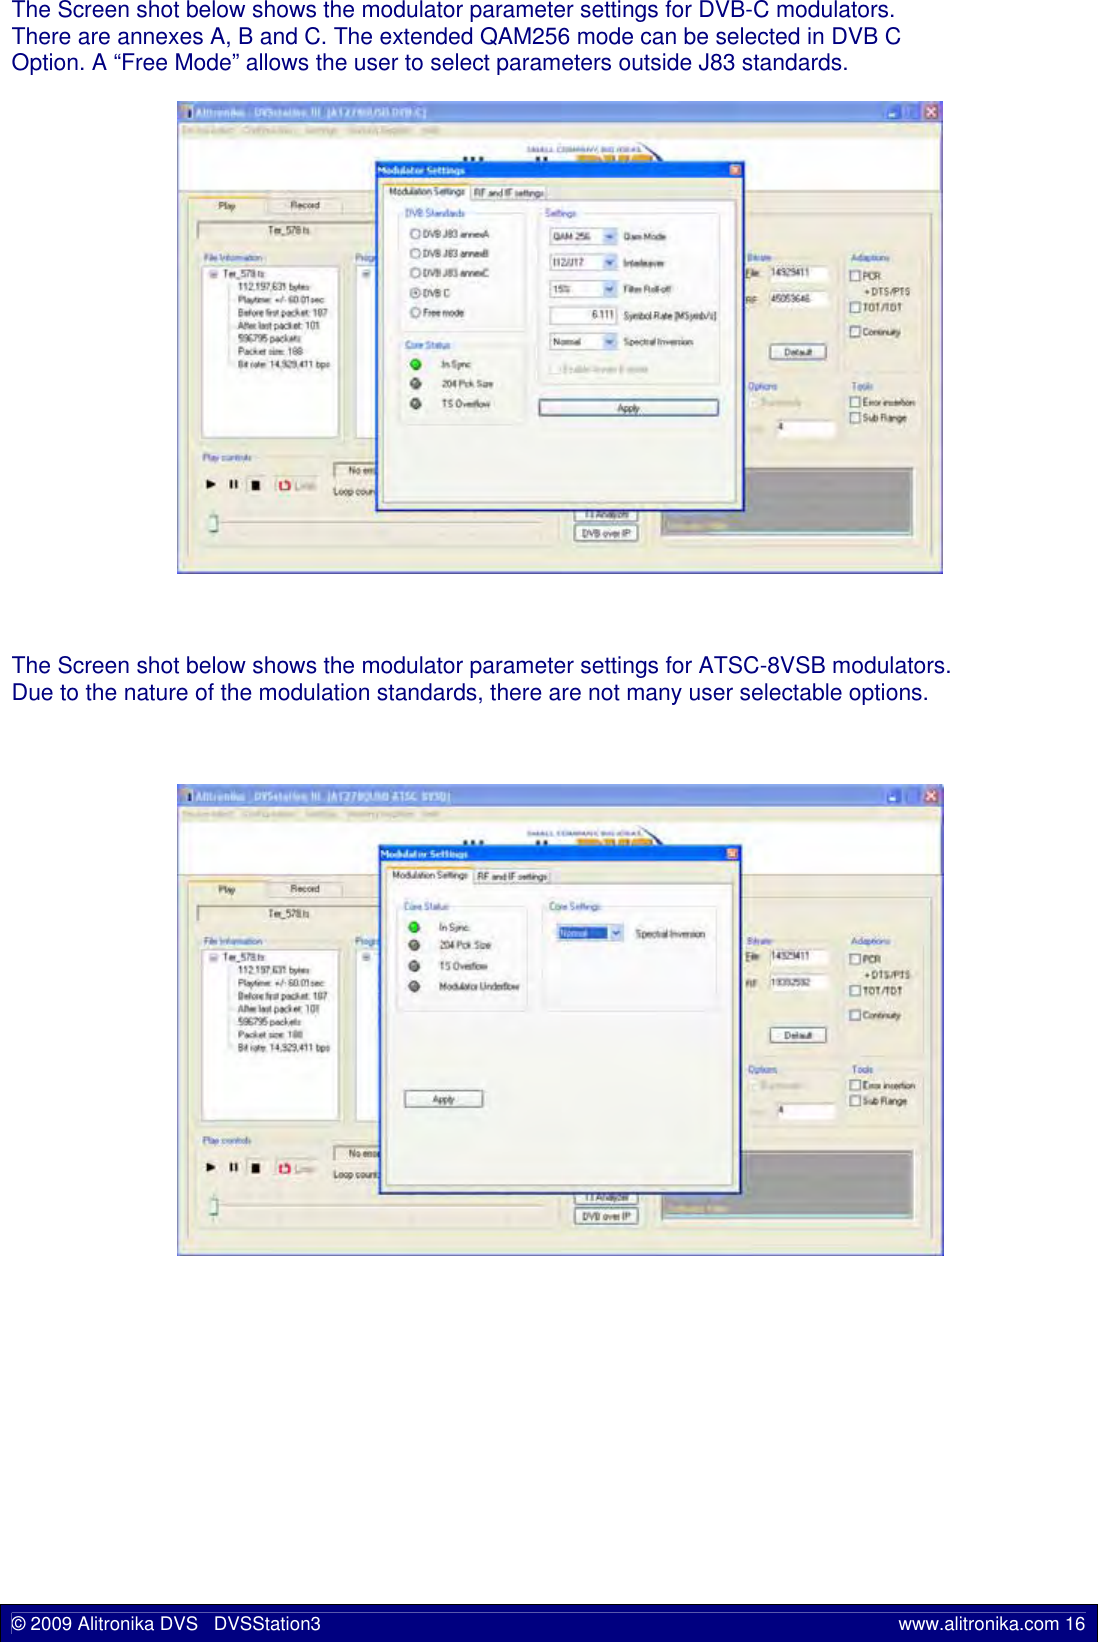 The Screen shot below shows the modulator parameter settings for DVB-C modulators.There are annexes A, B and C. The extended QAM256 mode can be selected in DVB COption. A “Free Mode” allows the user to select parameters outside J83 standards.The Screen shot below shows the modulator parameter settings for ATSC-8VSB modulators.Due to the nature of the modulation standards, there are not many user selectable options.© 2009 Alitronika DVS   DVSStation3 www.alitronika.com 16